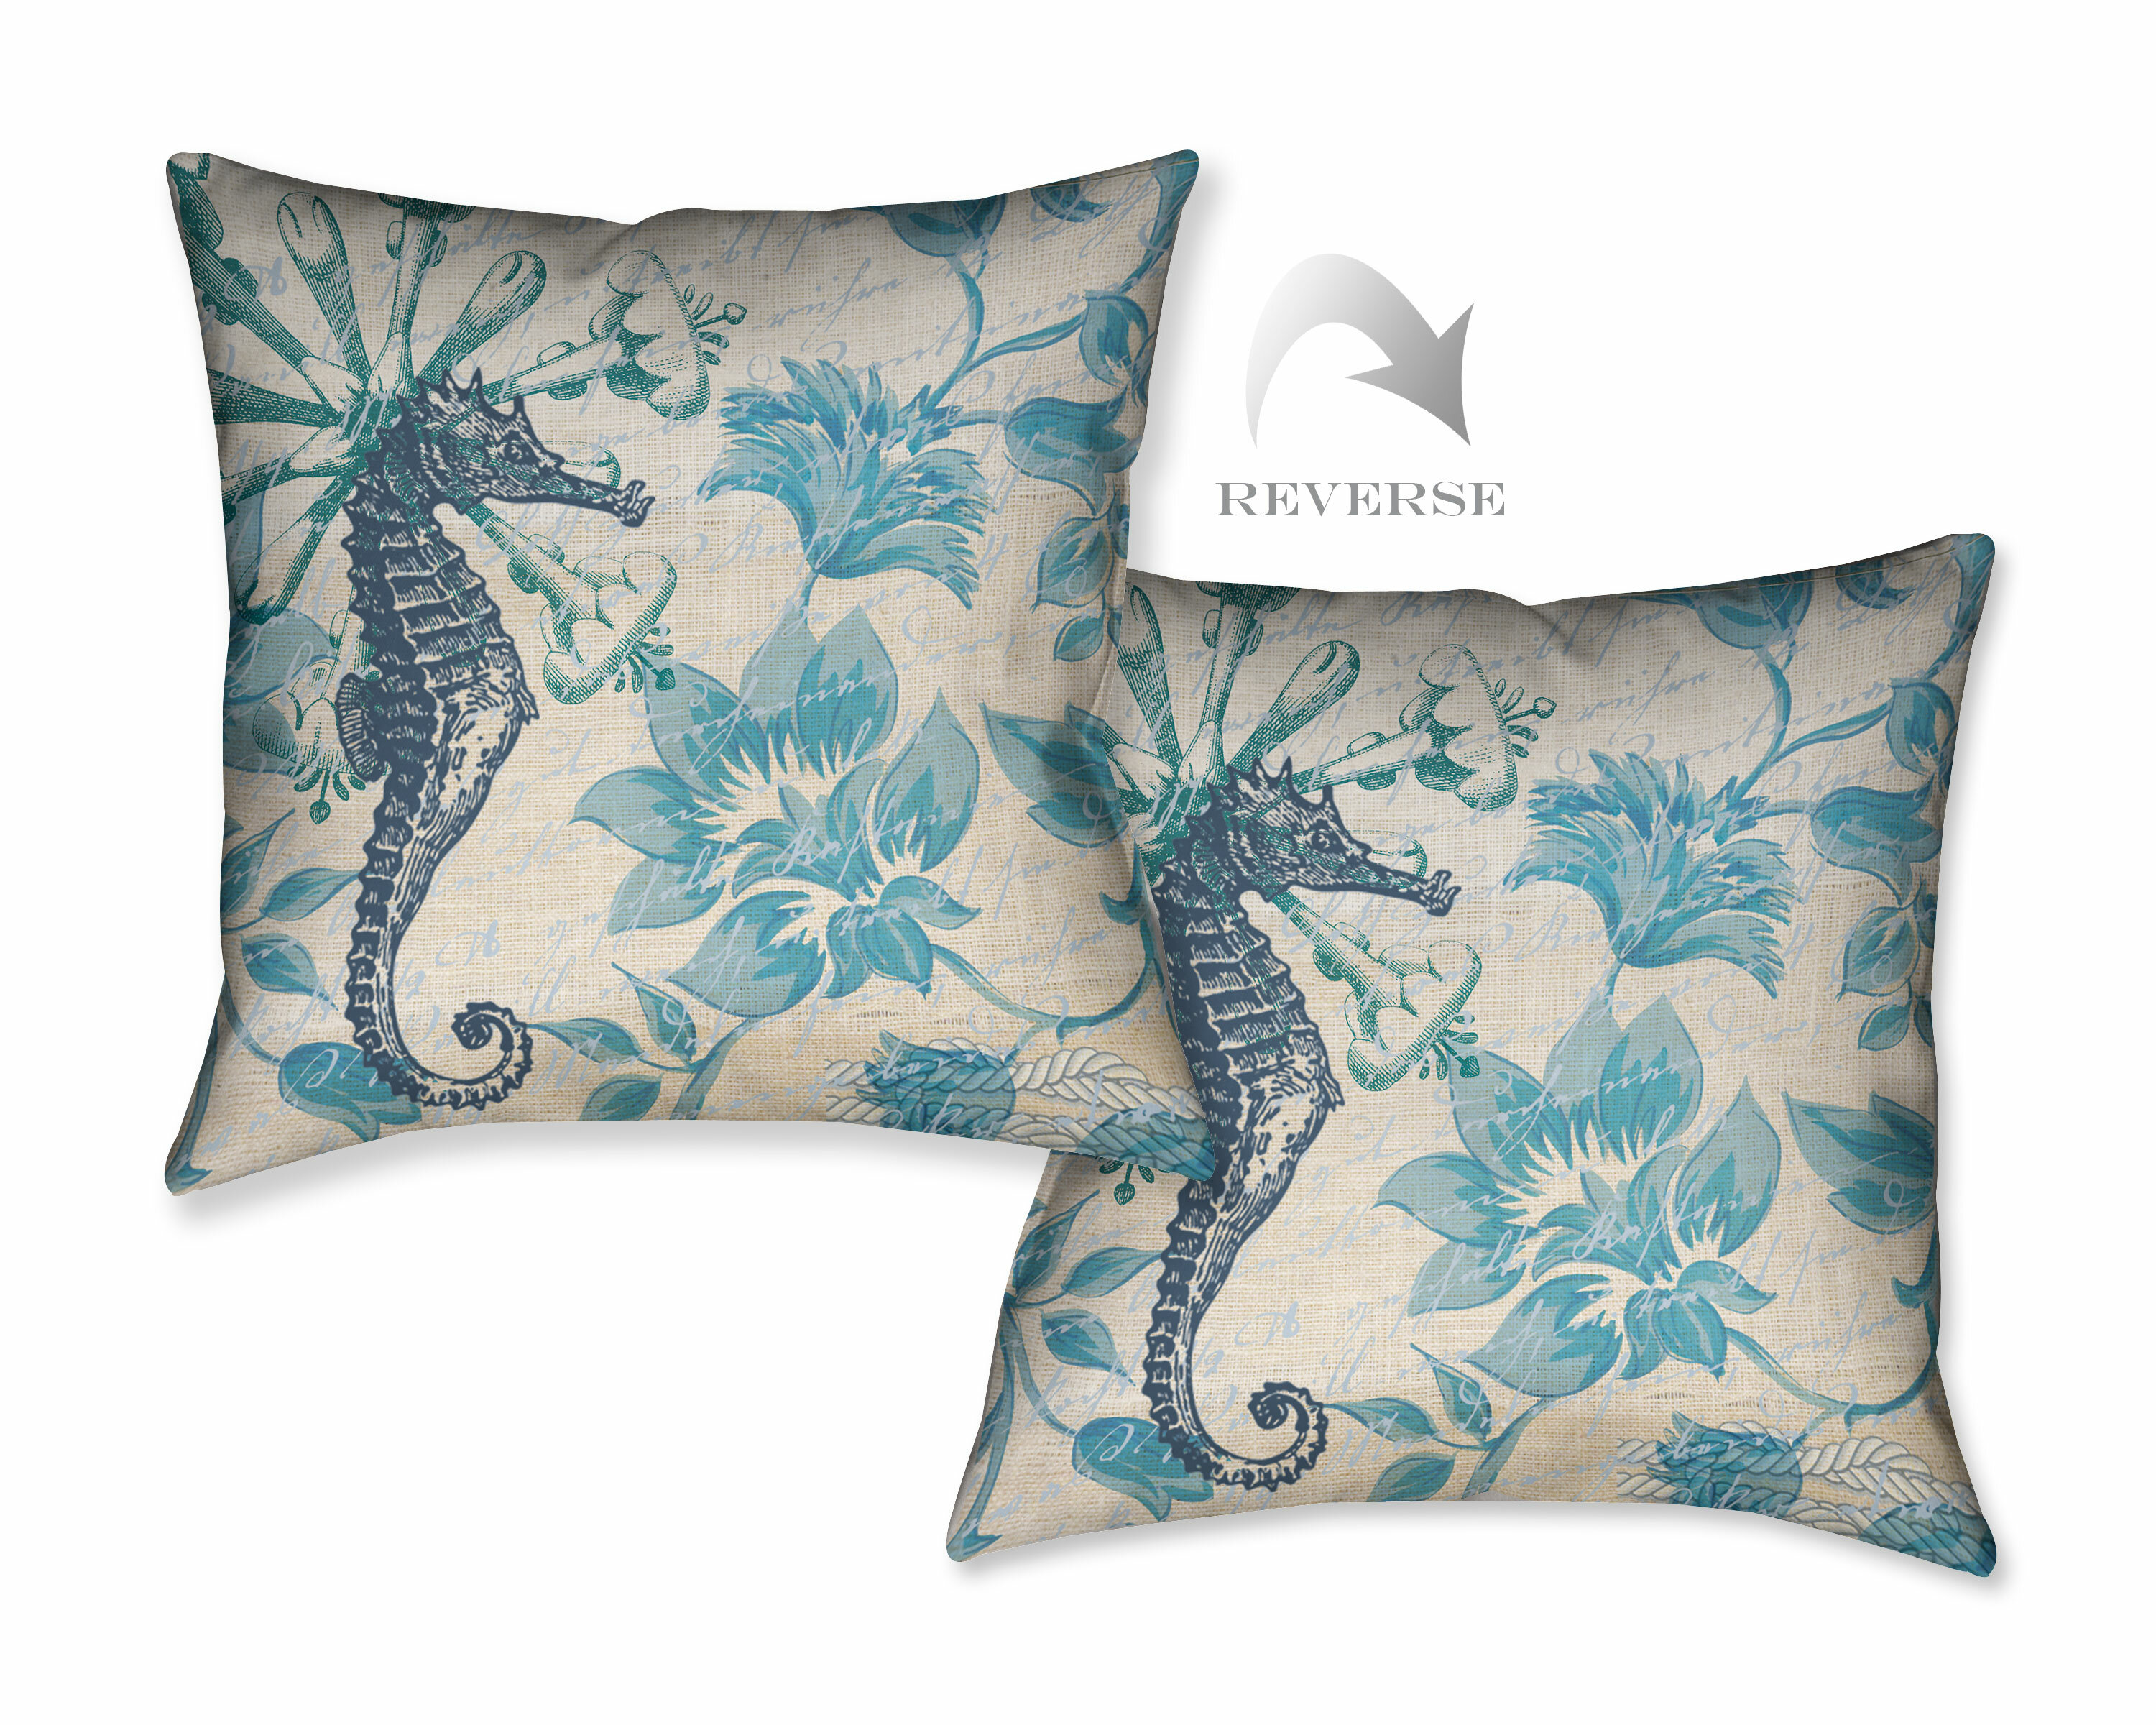 Teal 18-inch X Sea Horses Indoor/Outdoor Throw Pillow Multi Color Character Modern Contemporary Nautical Coastal Polyester One